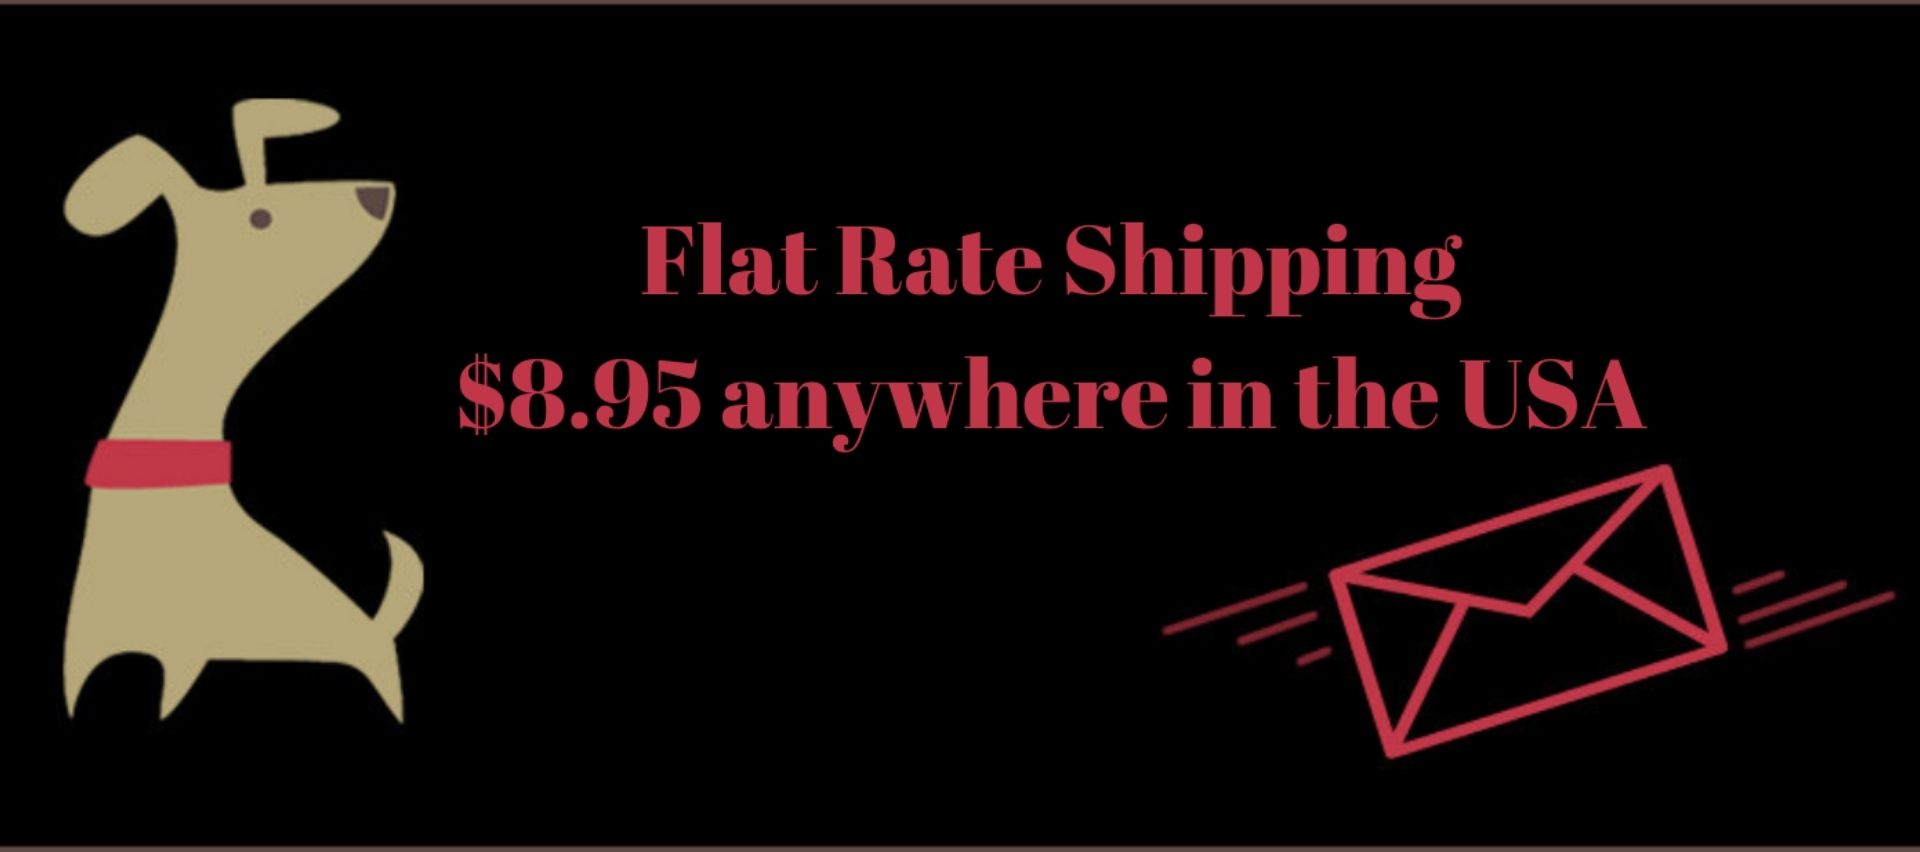 Flat Rate Shipping $8.95